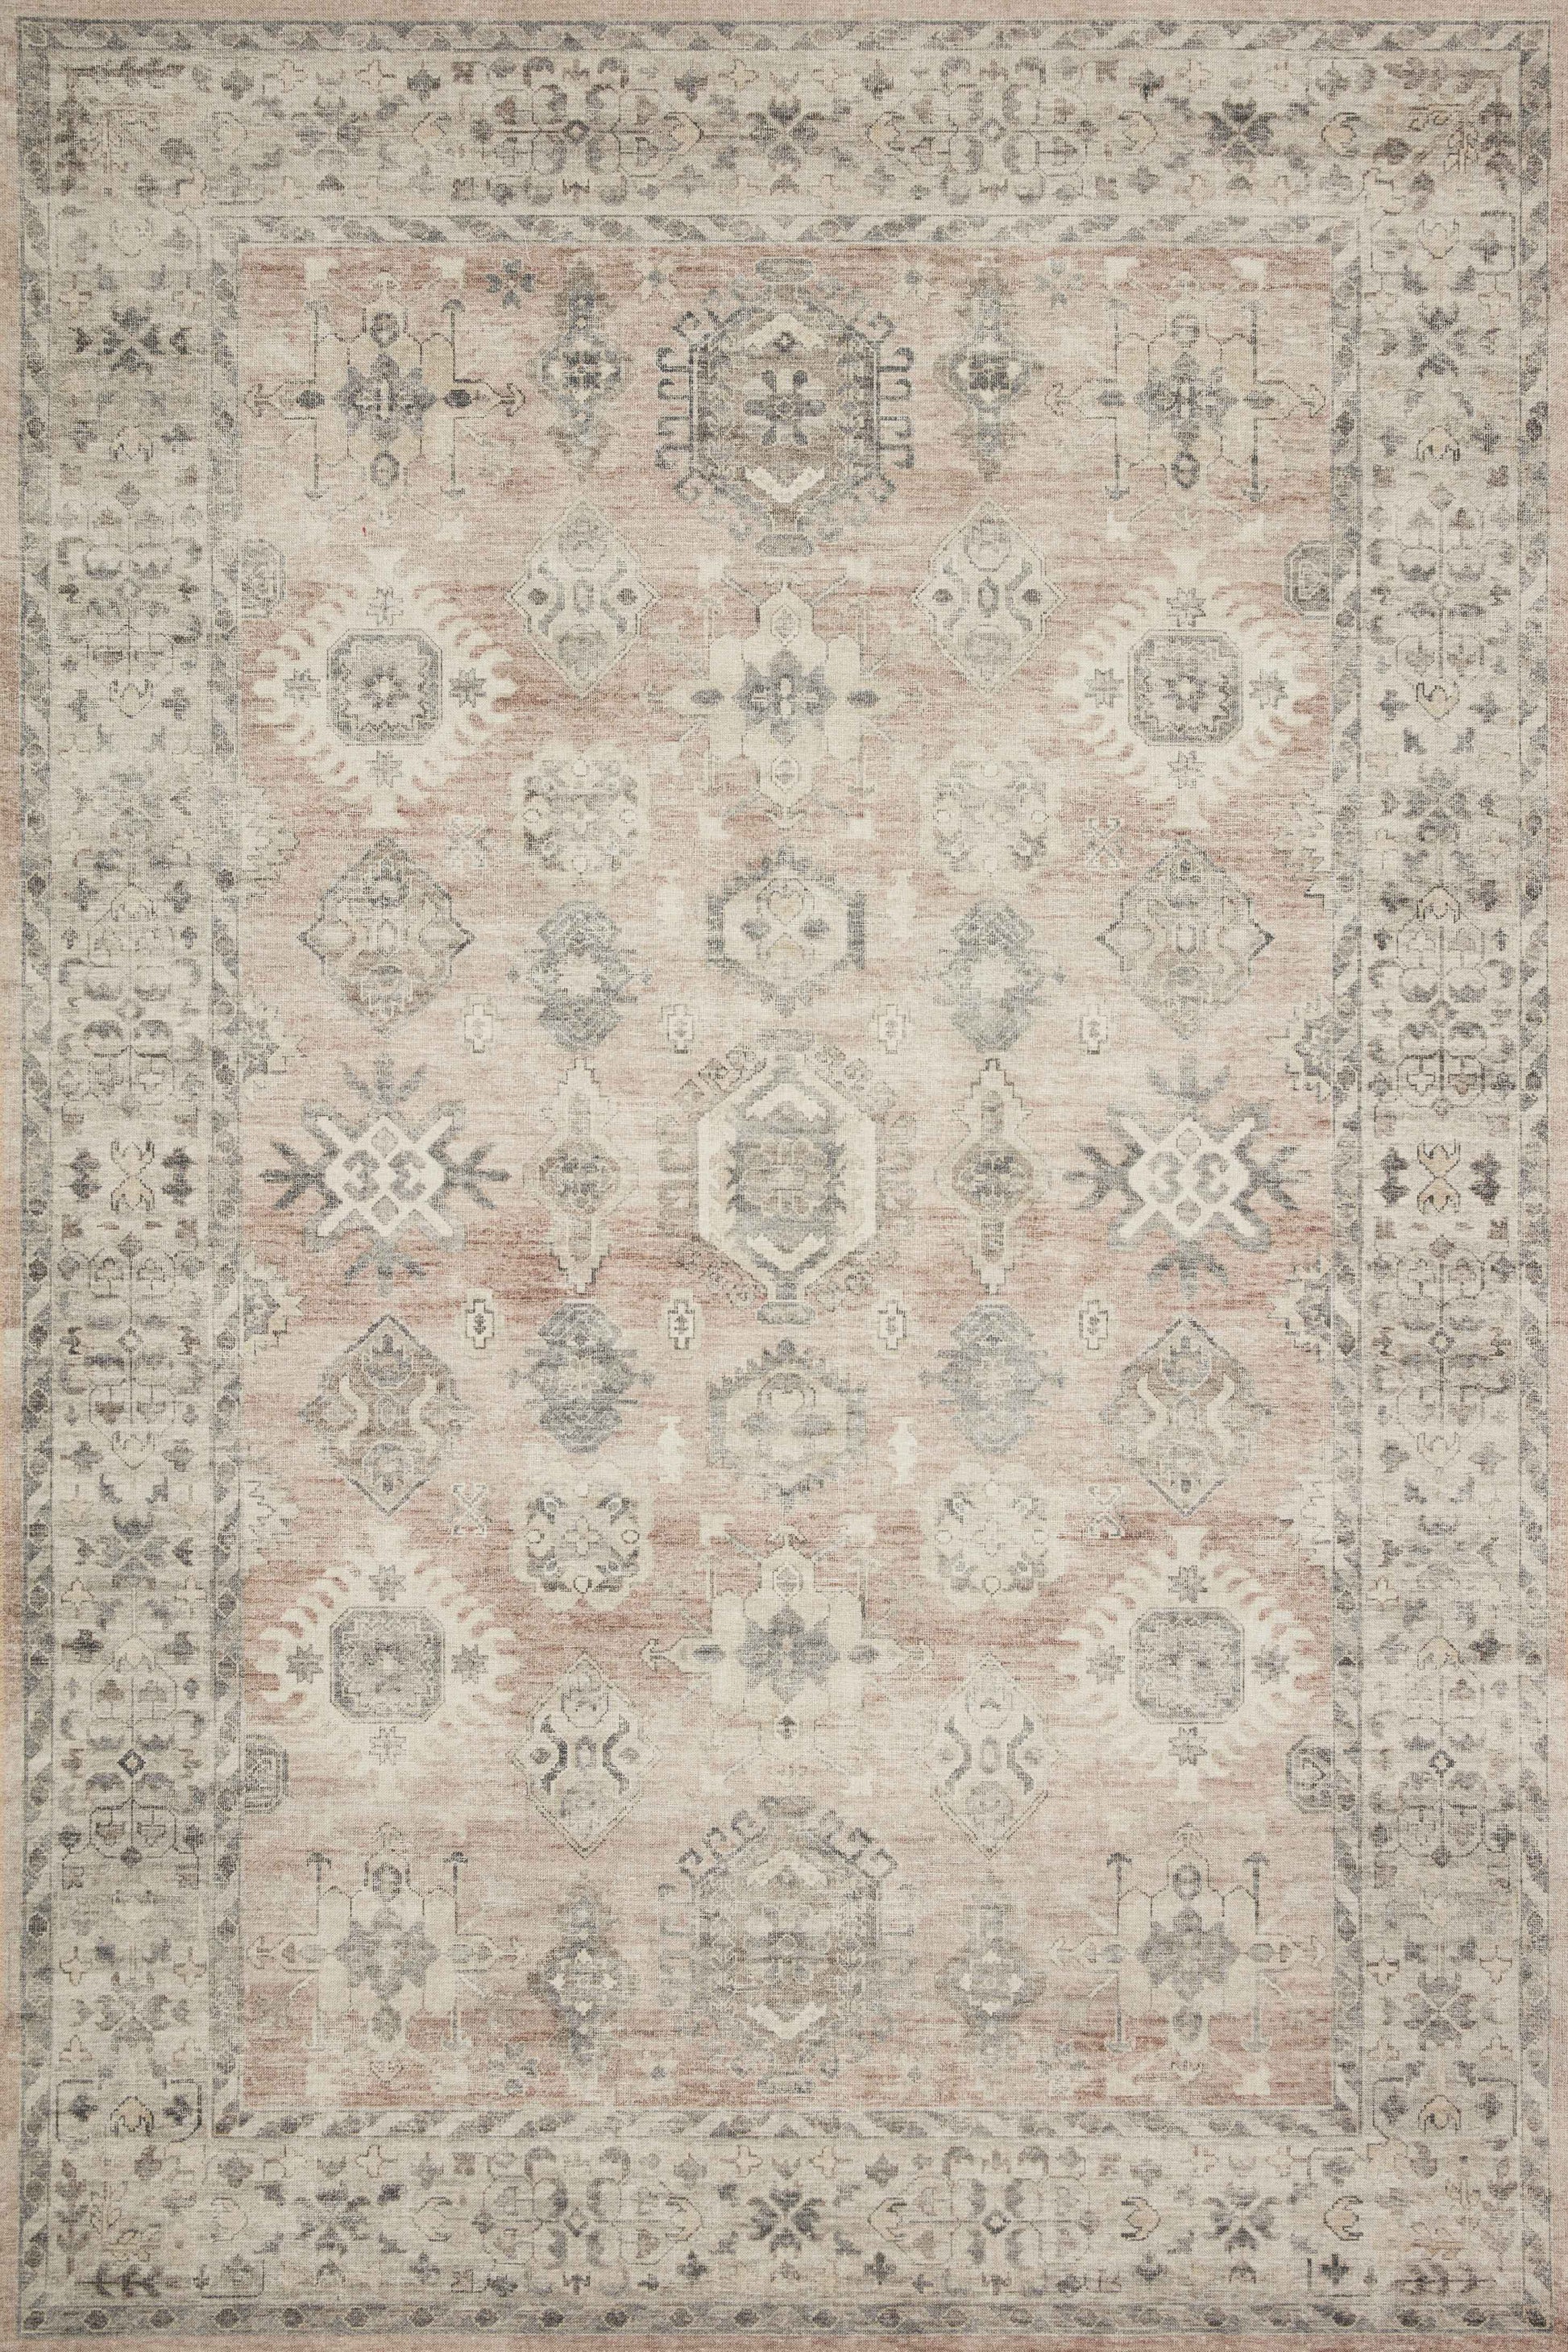 A picture of Loloi's Hathaway rug, in style HTH-03, color Java / Multi